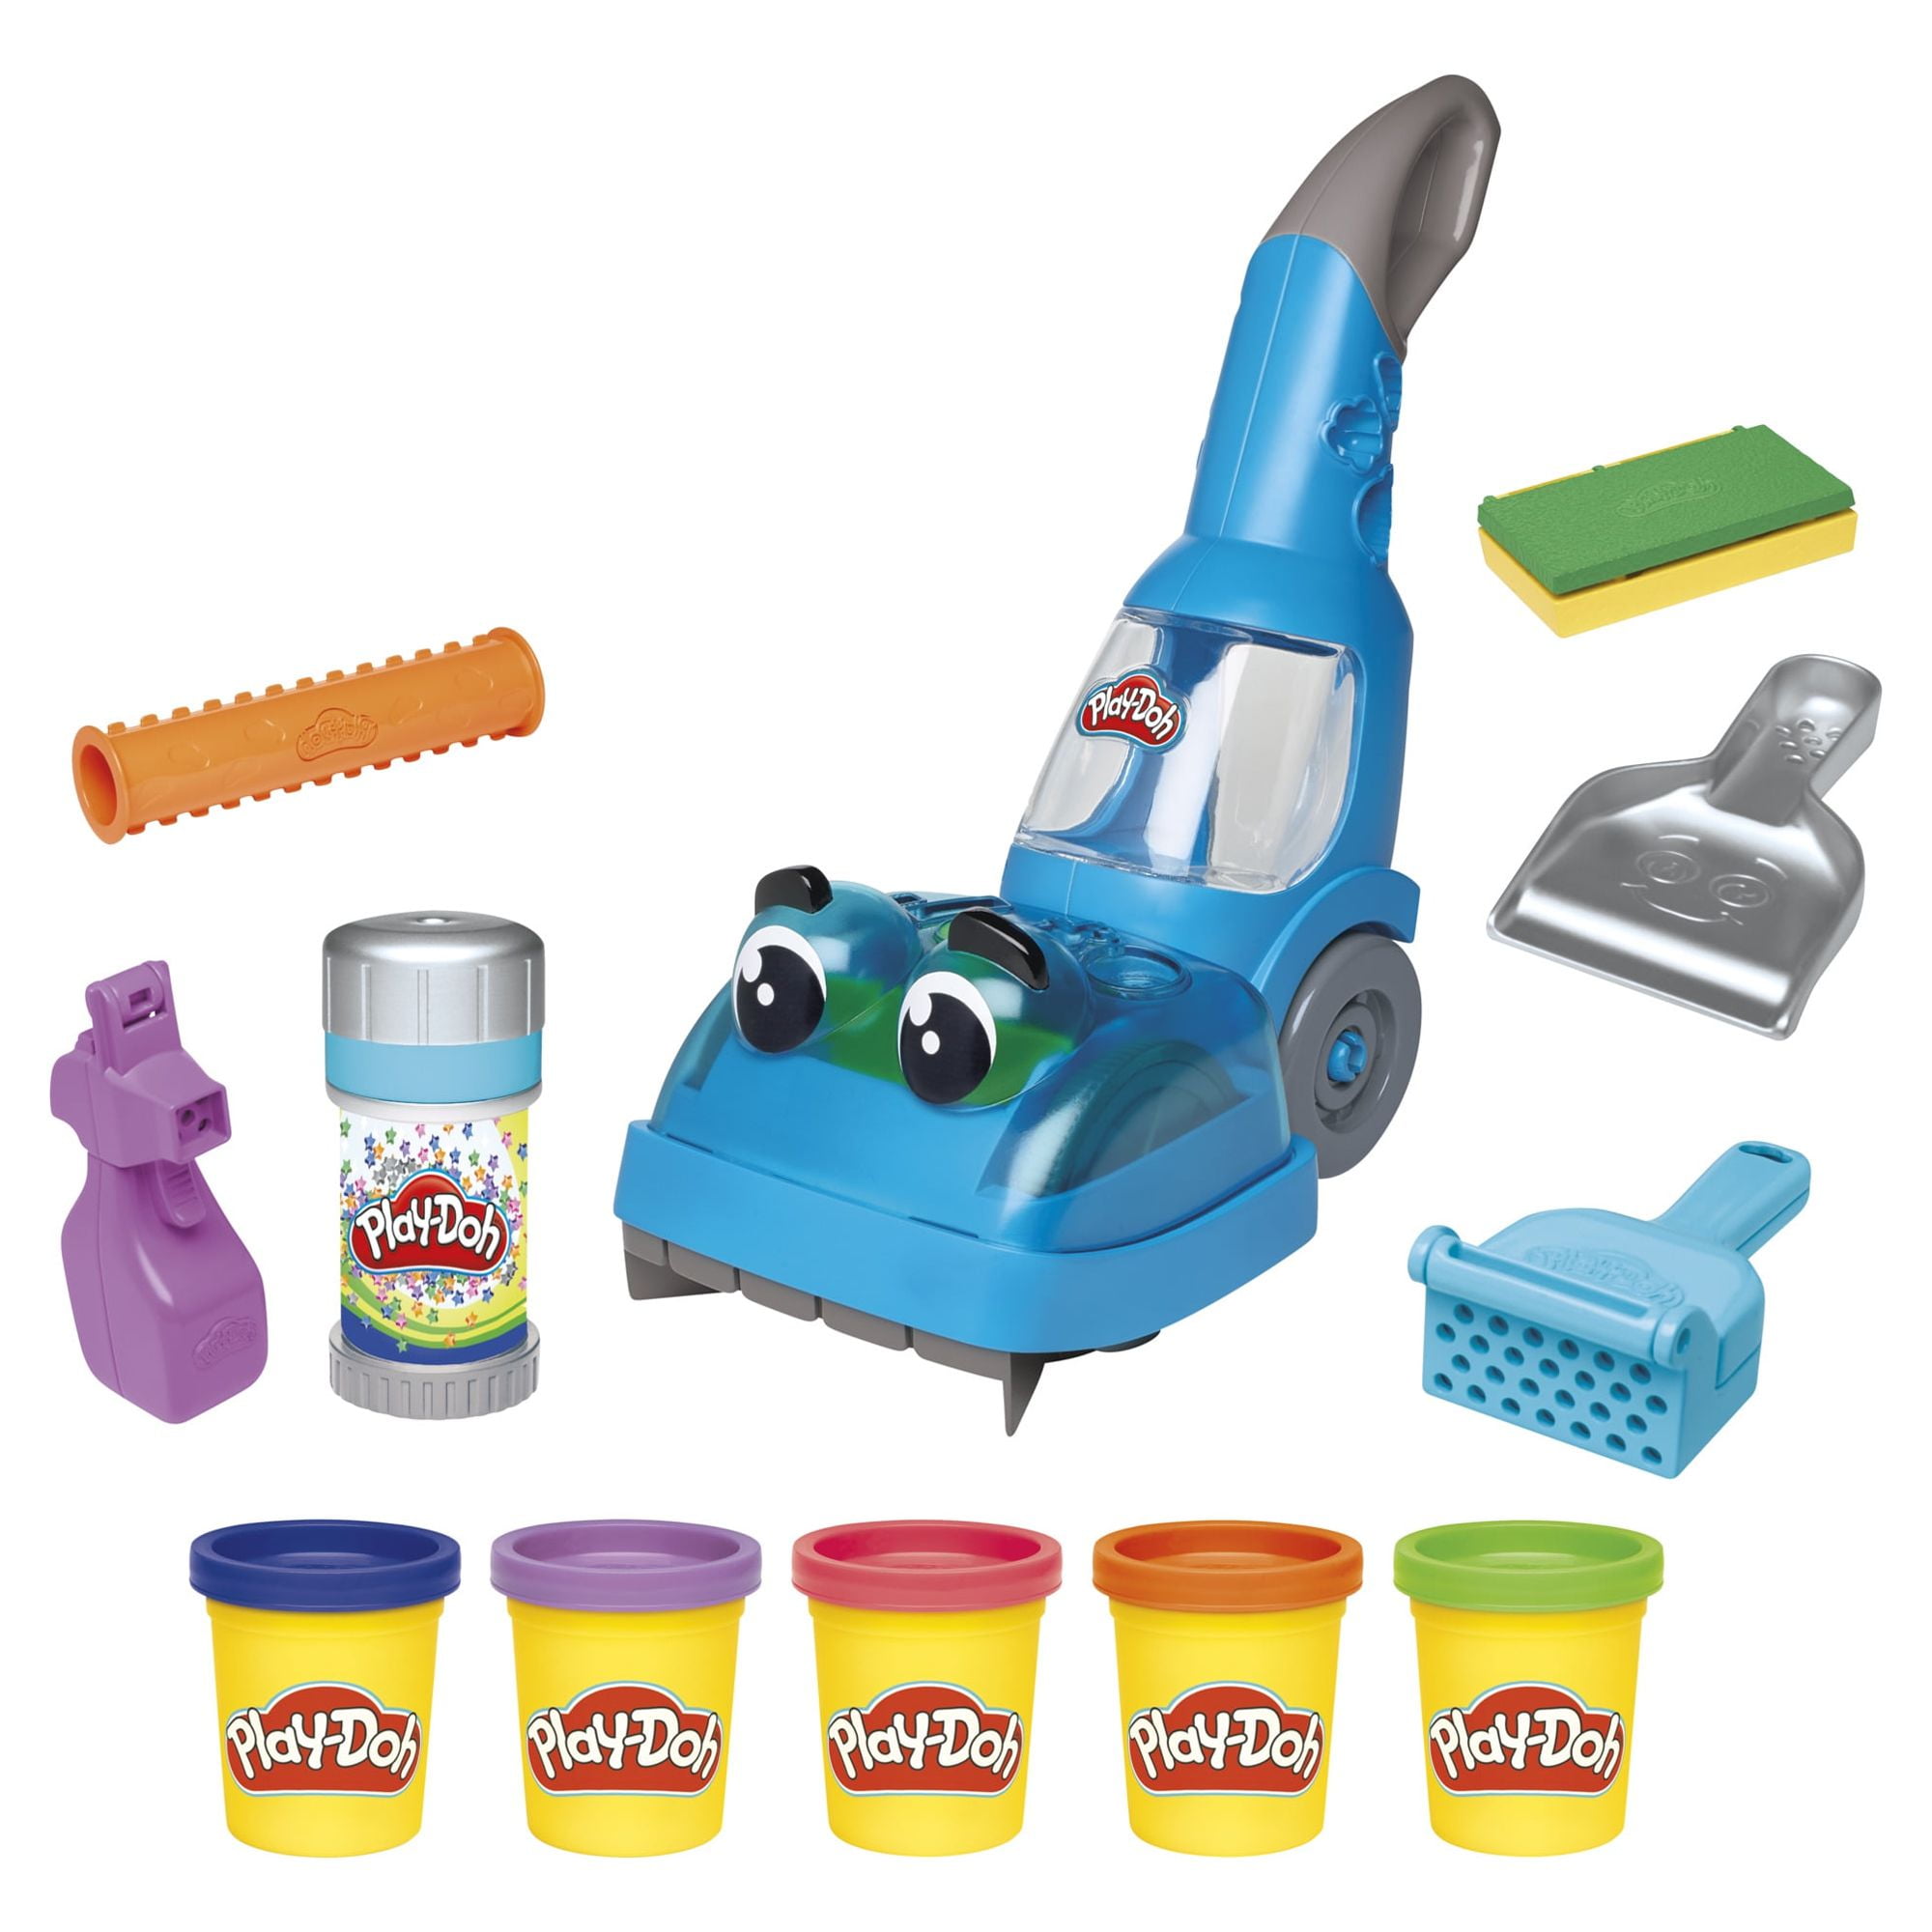 Play-Doh Zoom Zoom Vacuum and Cleanup Toy with 5 Cans of Modeling